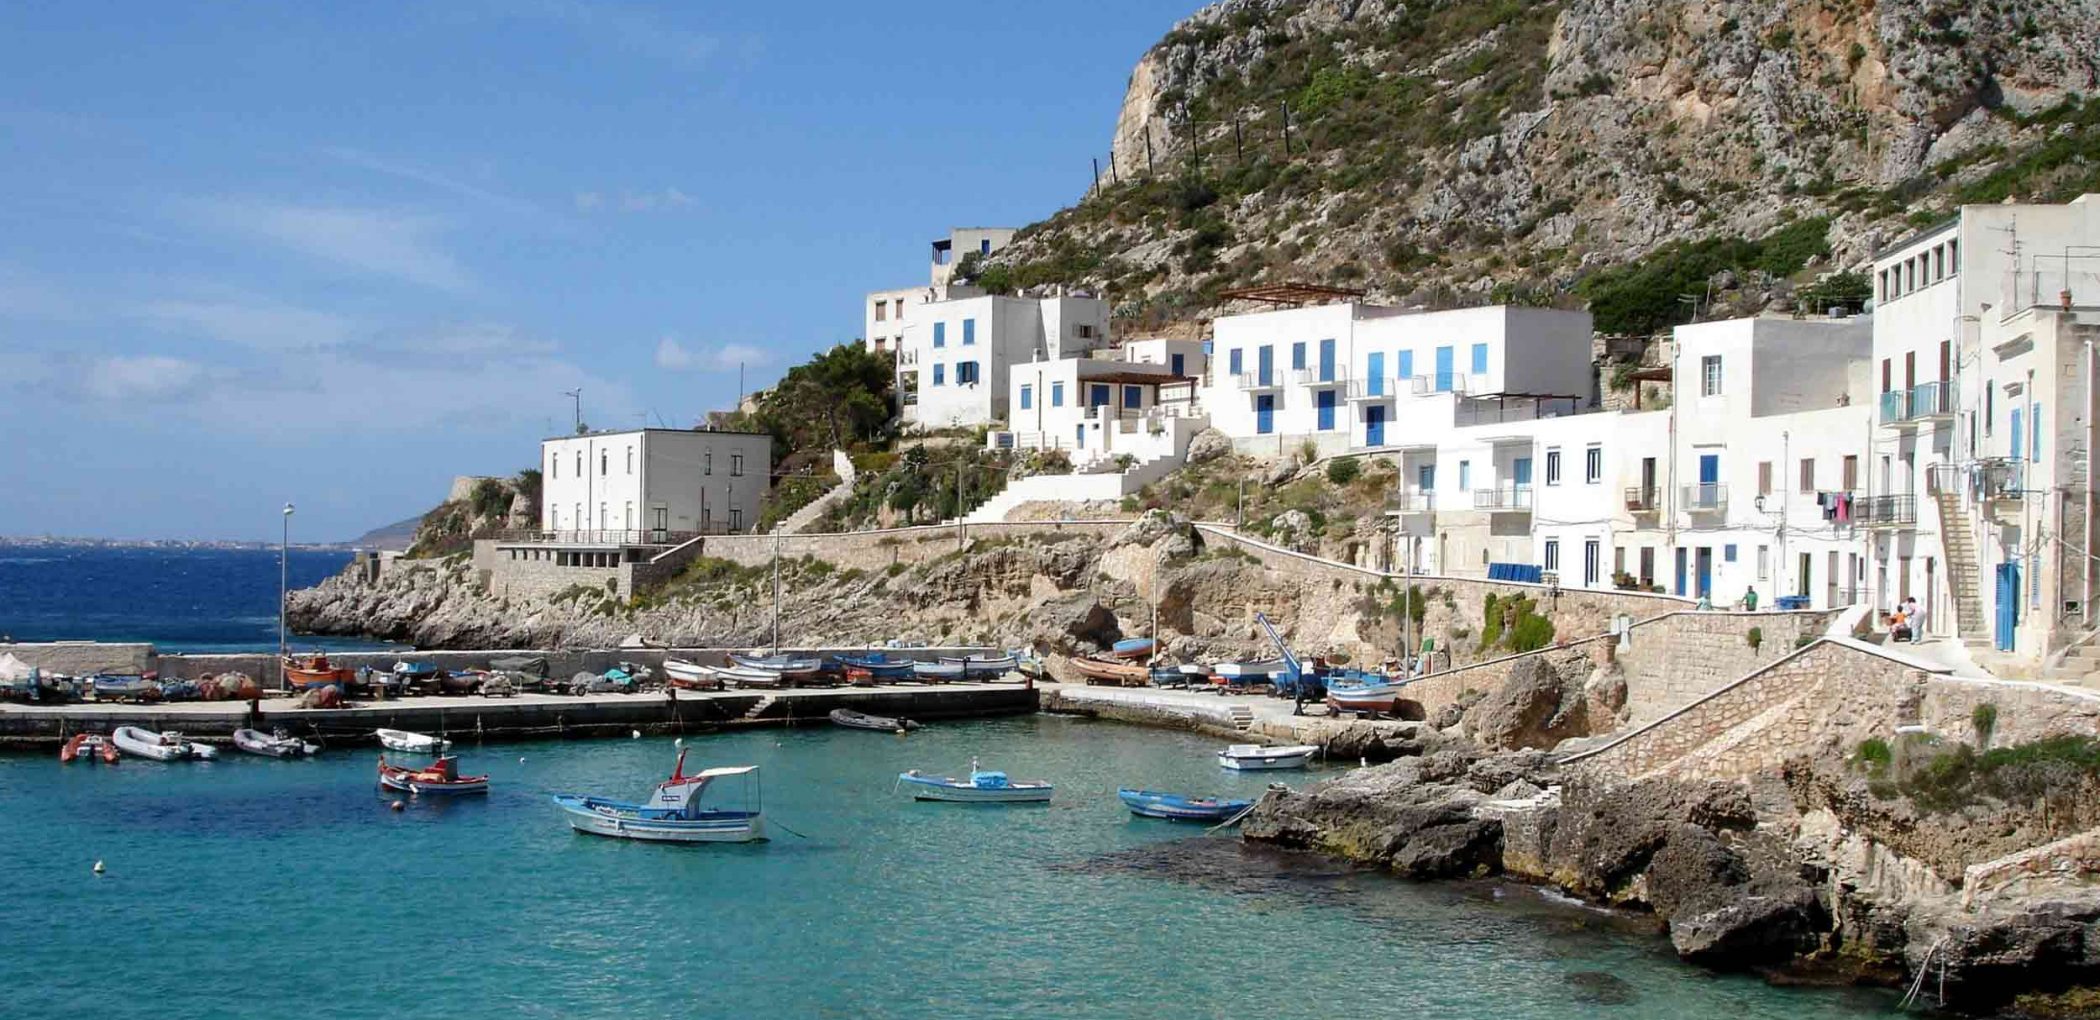 Typical buildings of the Egadi islands overlooking the sea